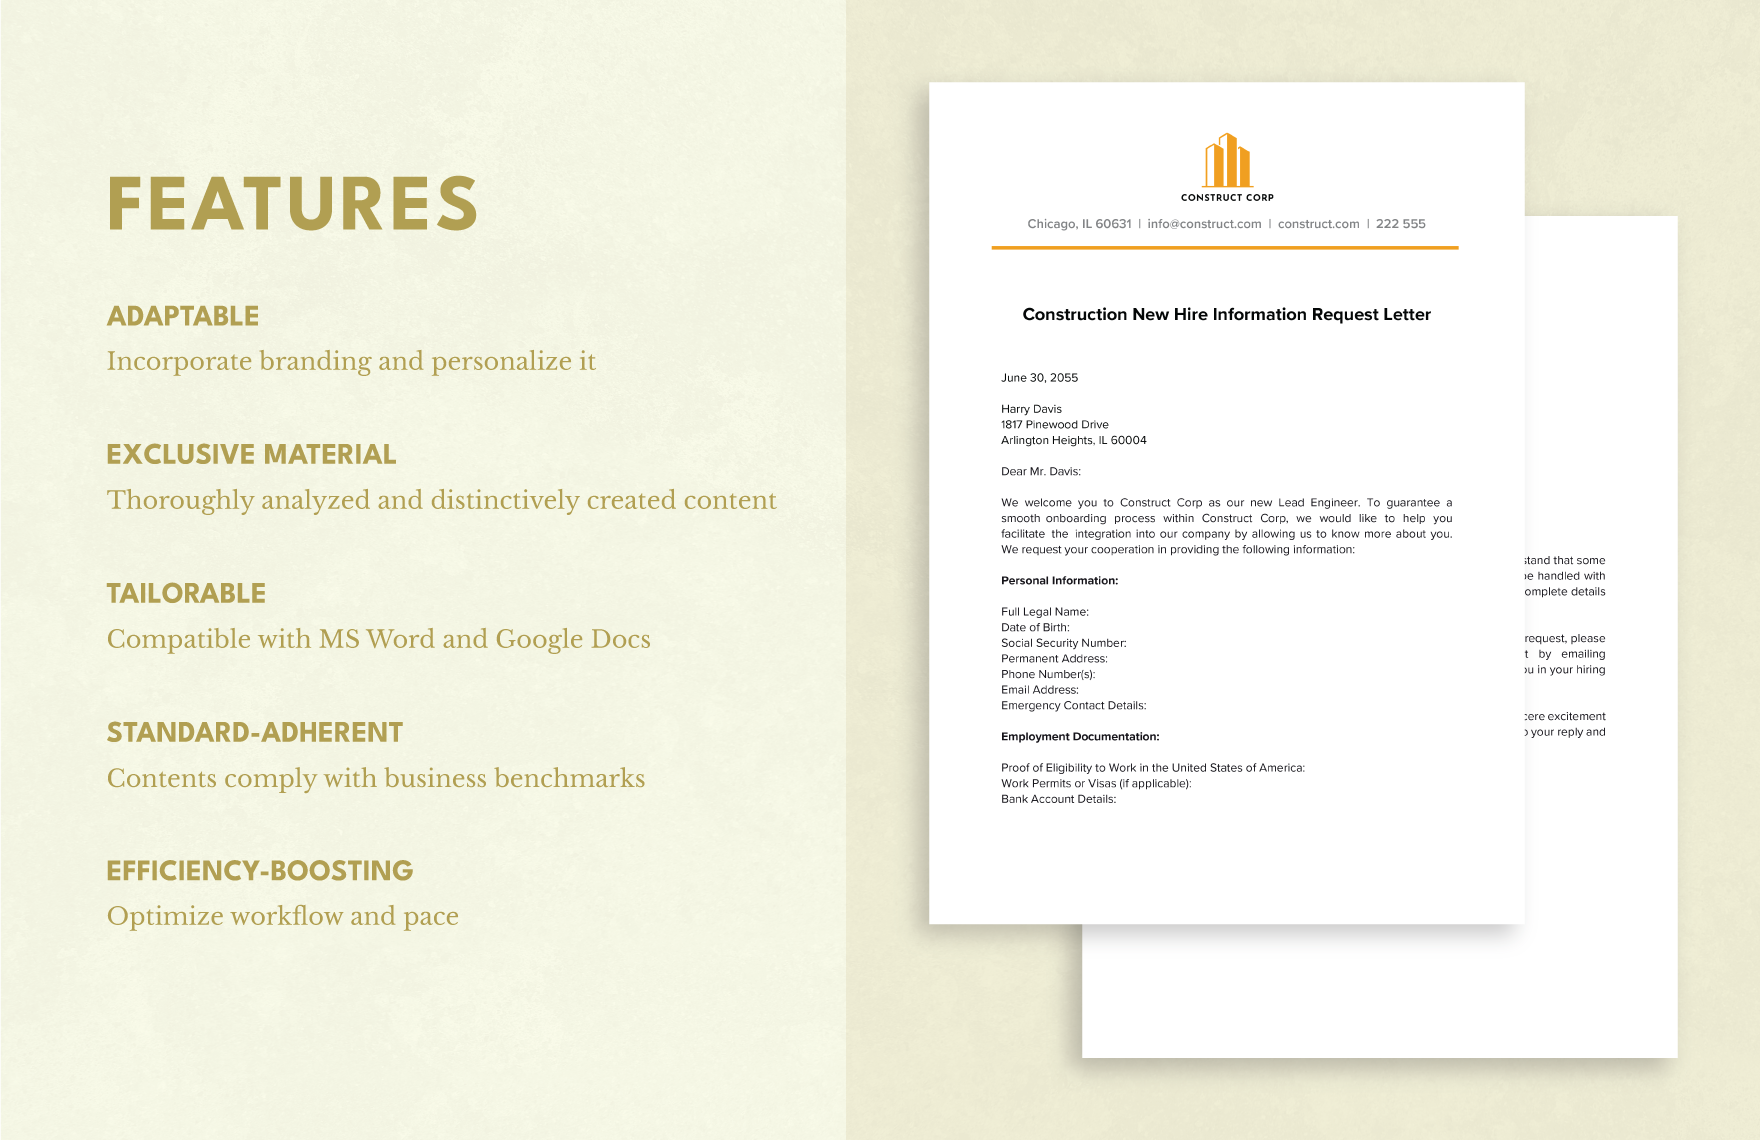 New Hire Information Request Letter Template